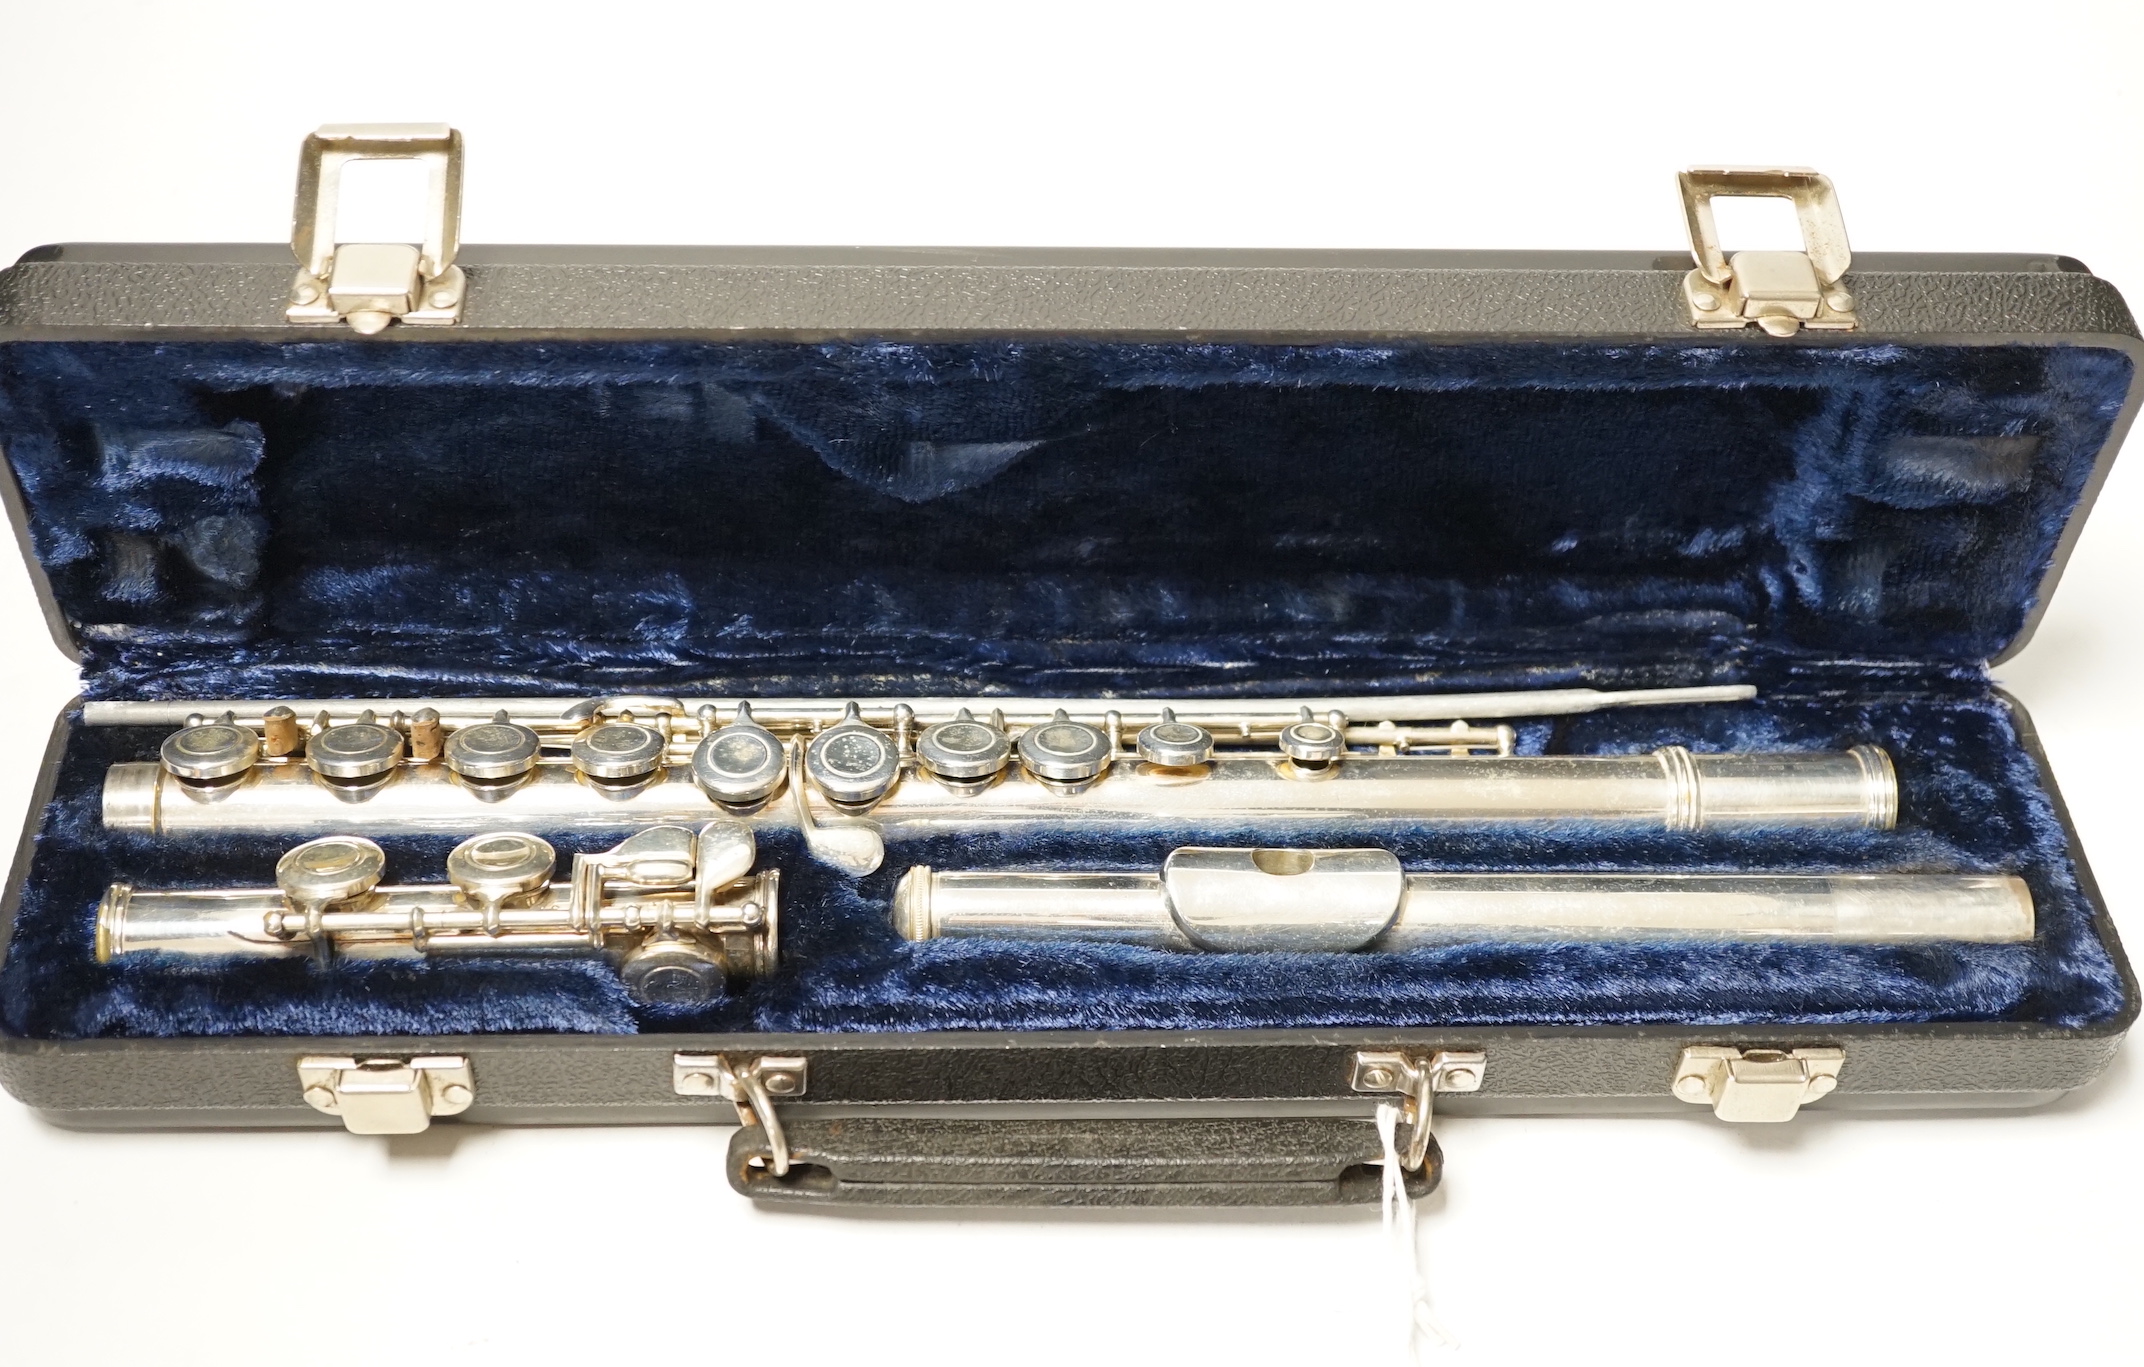 A cased Boosey and Hawkes 400 flute with closed hole key work